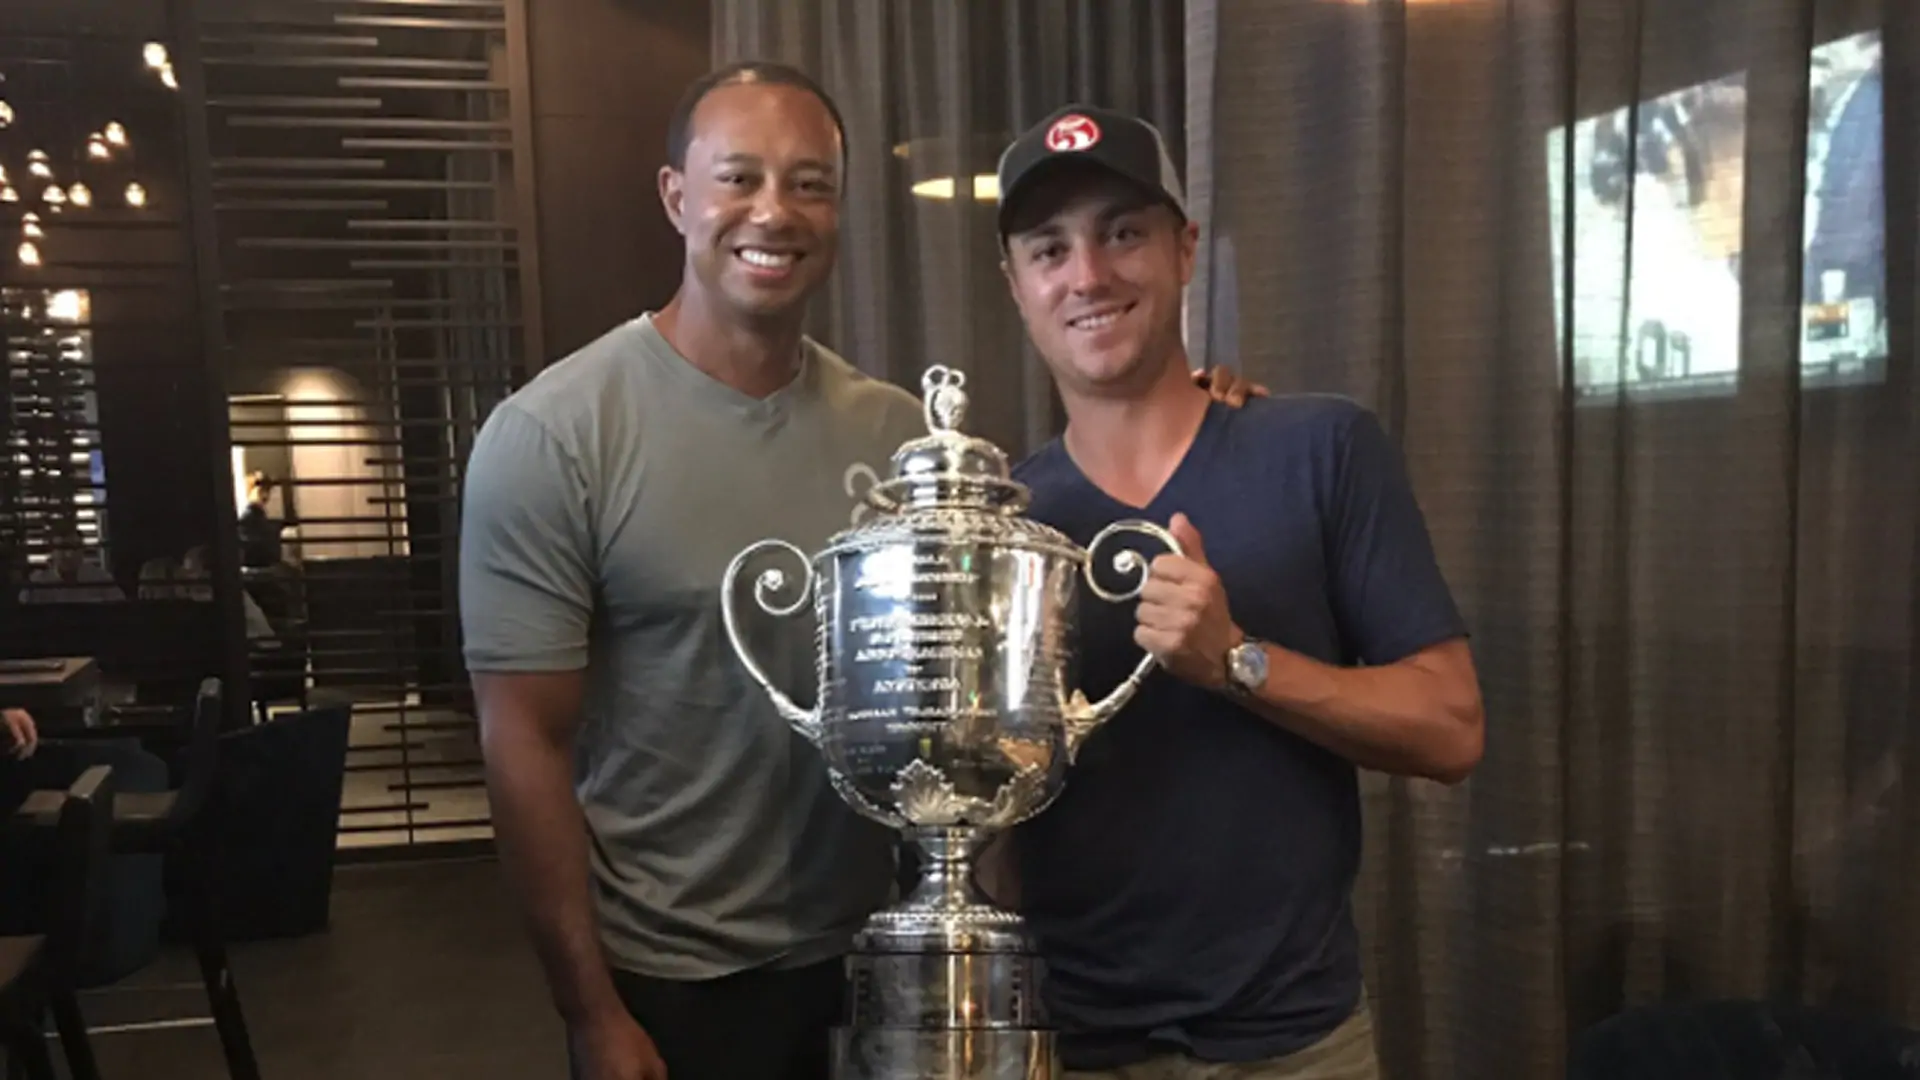 Thomas: Dinner with Tiger, PGA win about equal